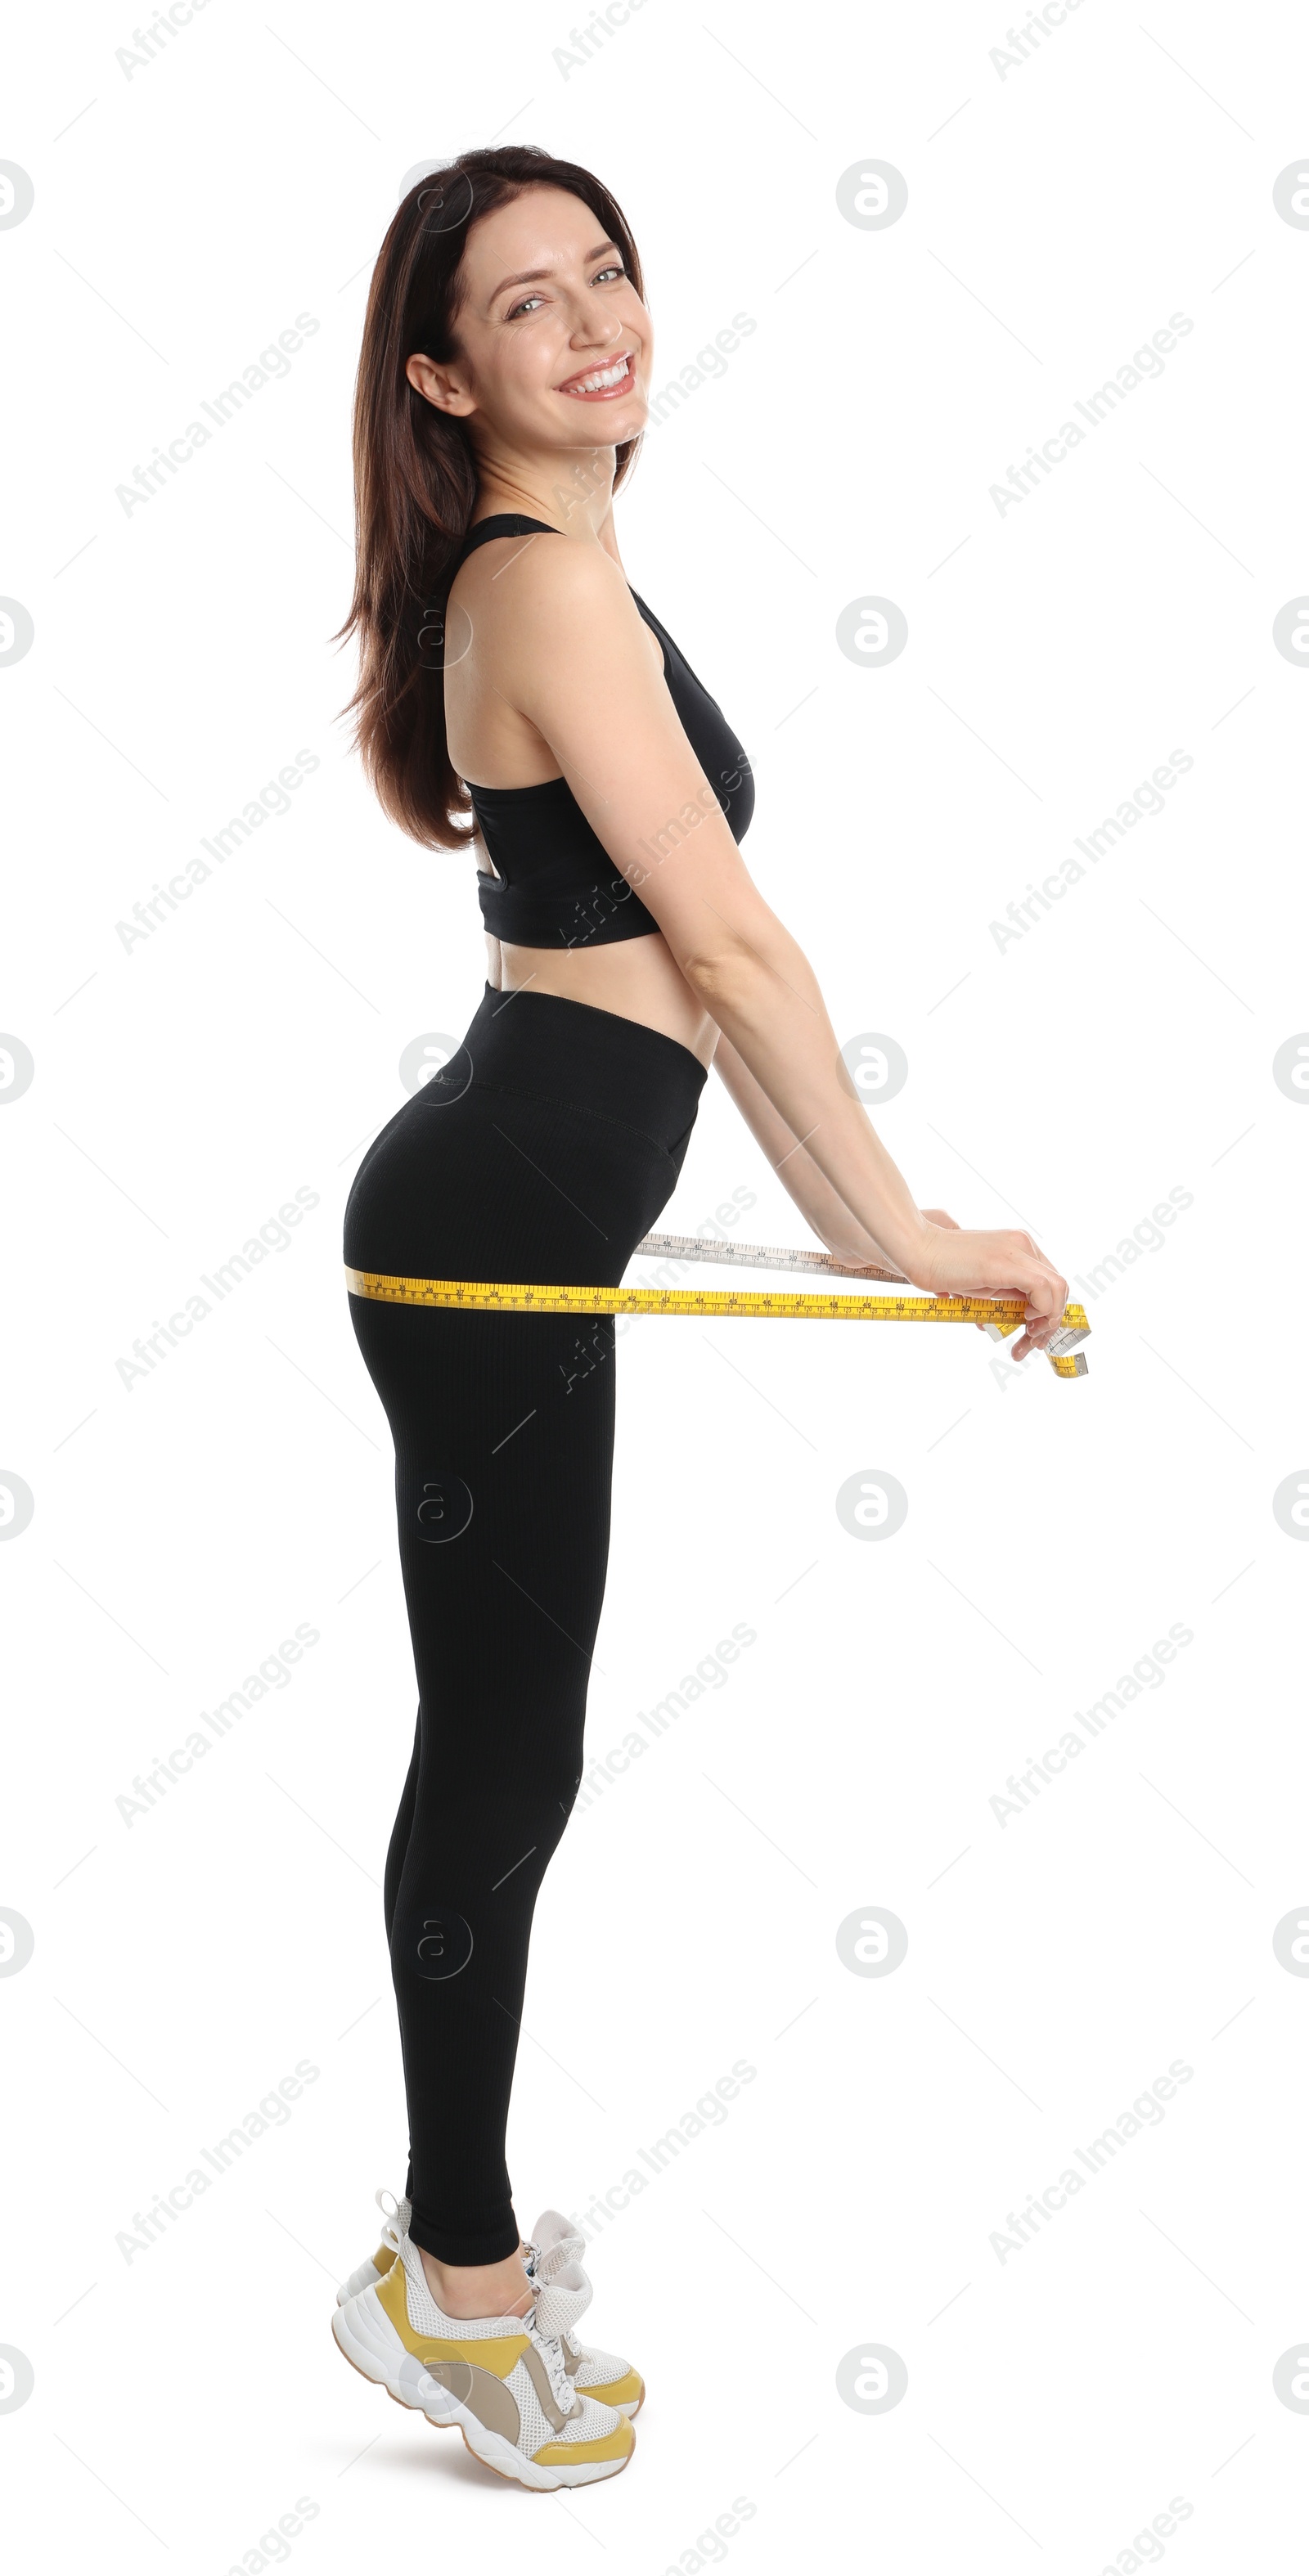 Photo of Happy young woman with measuring tape showing her slim body against white background